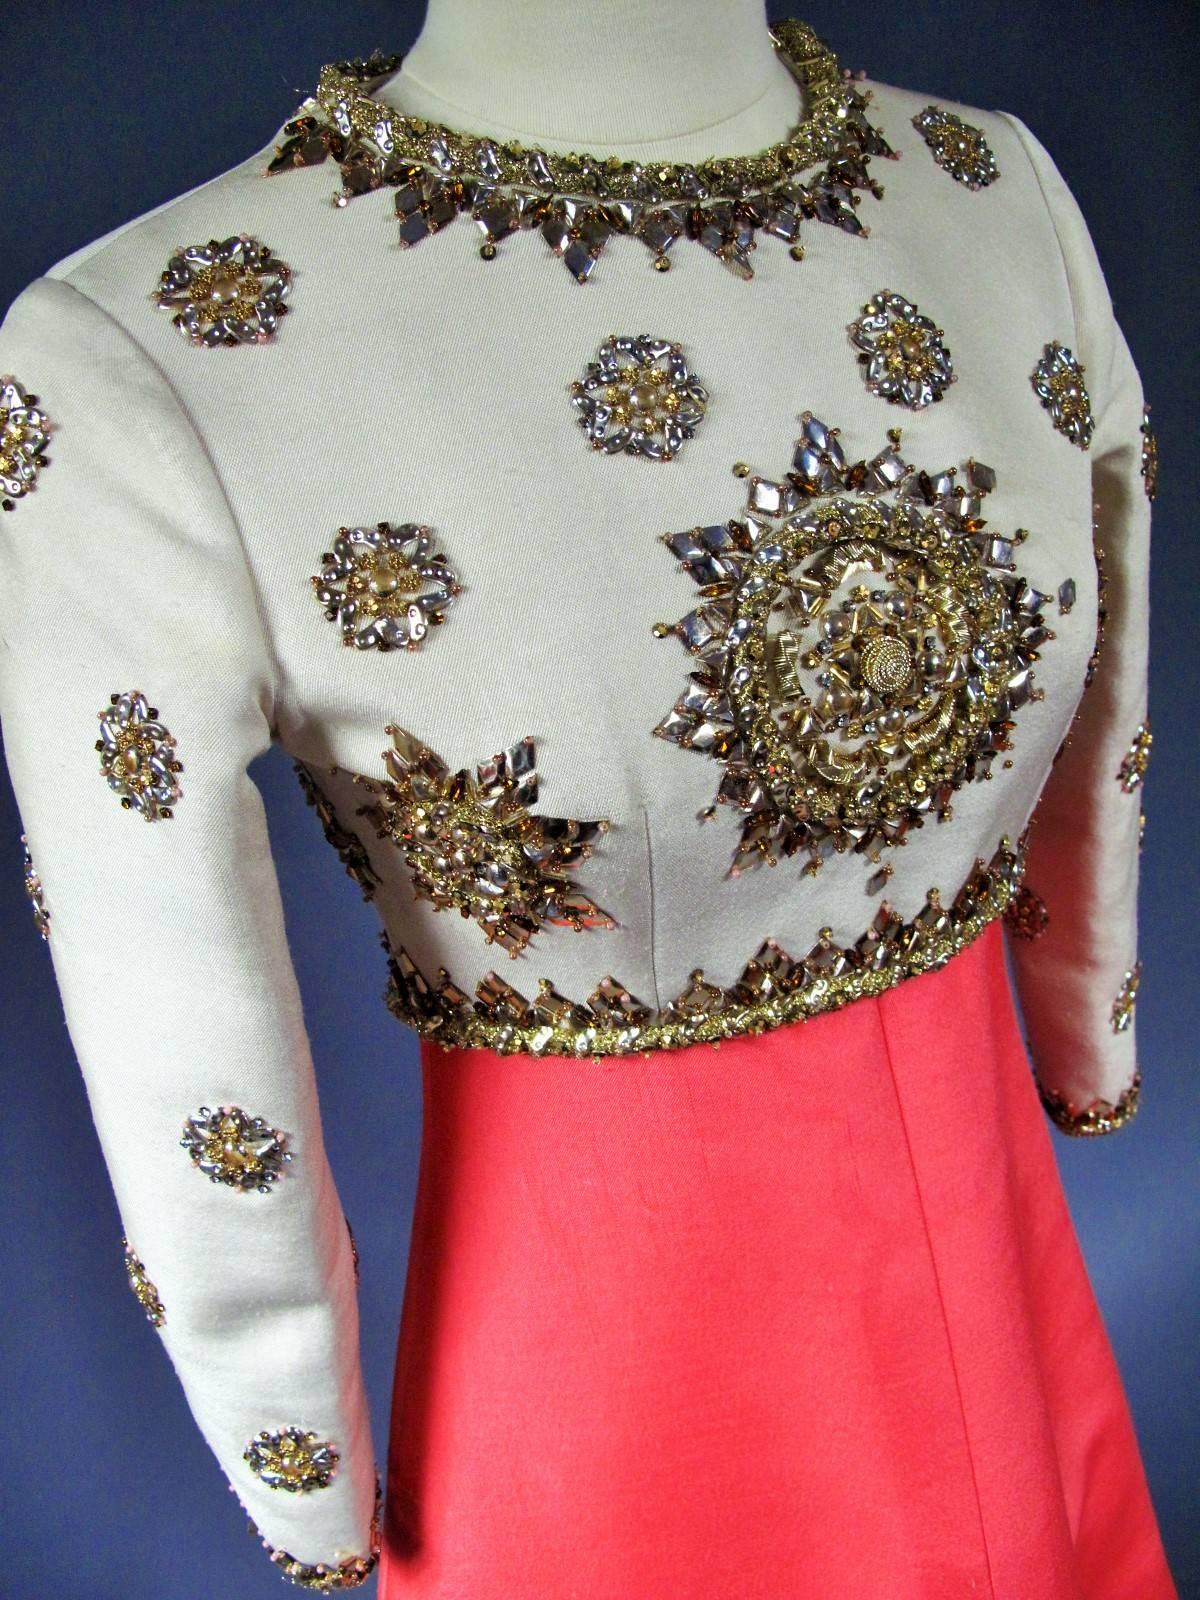 Circa 1972/74
France Haute Couture
Ceremonial Pierre Balmain Haute couture dress in gazar dating from the 70s. Cream Top with long sleeves and futuristic embroideries from a famous couture House (Rebe?, Lesage?) of wrappings sequins, beads,